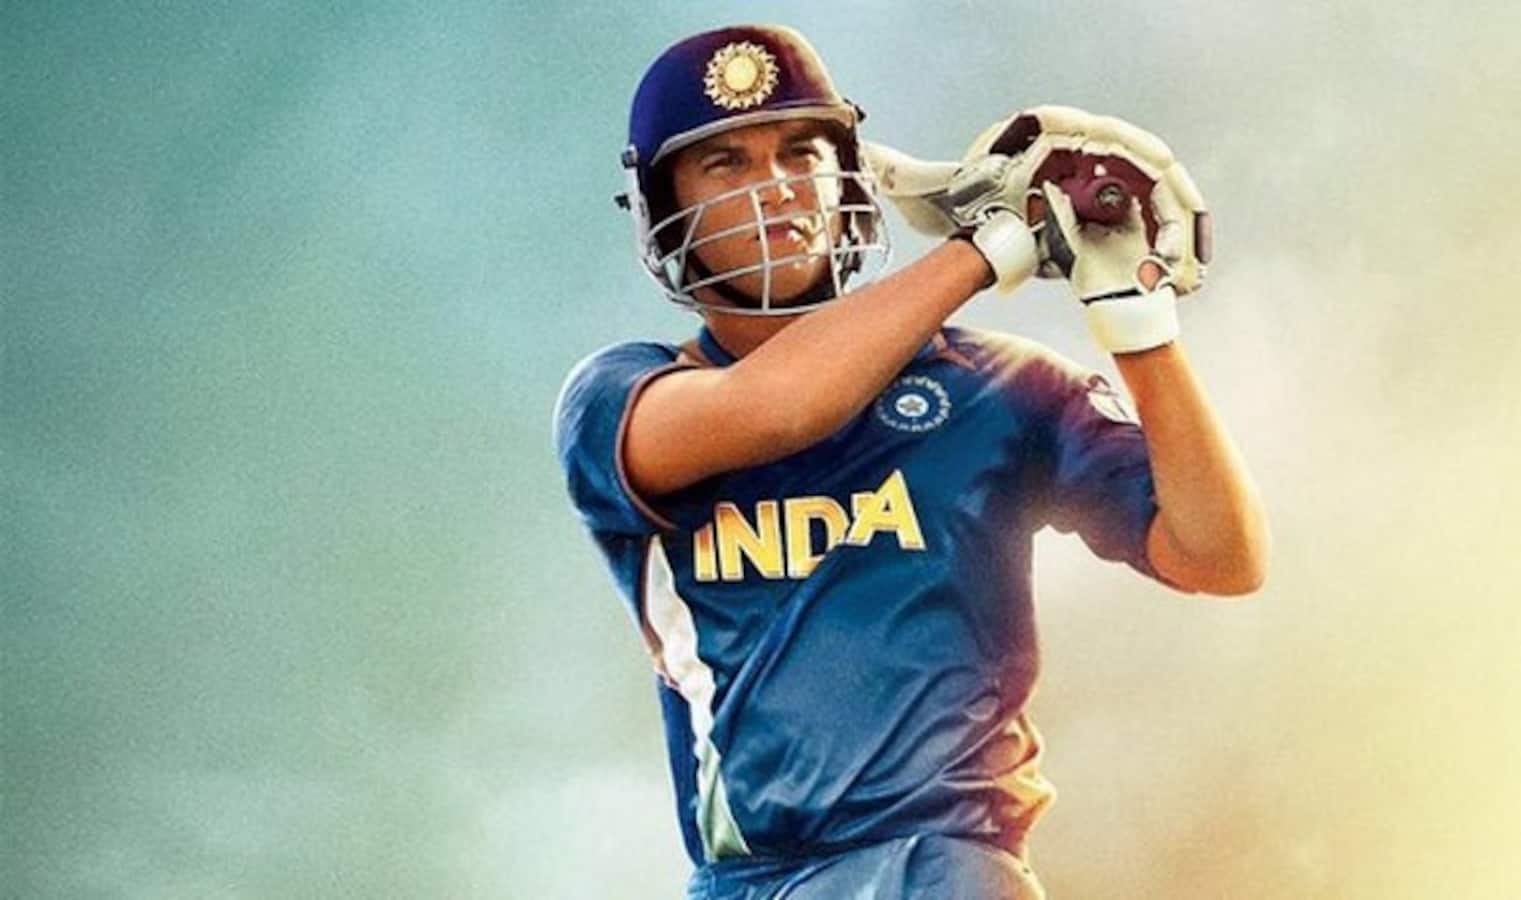 MS Dhoni - The Untold Story critics review: Sushant Singh Rajput's performance has impressed one and all!